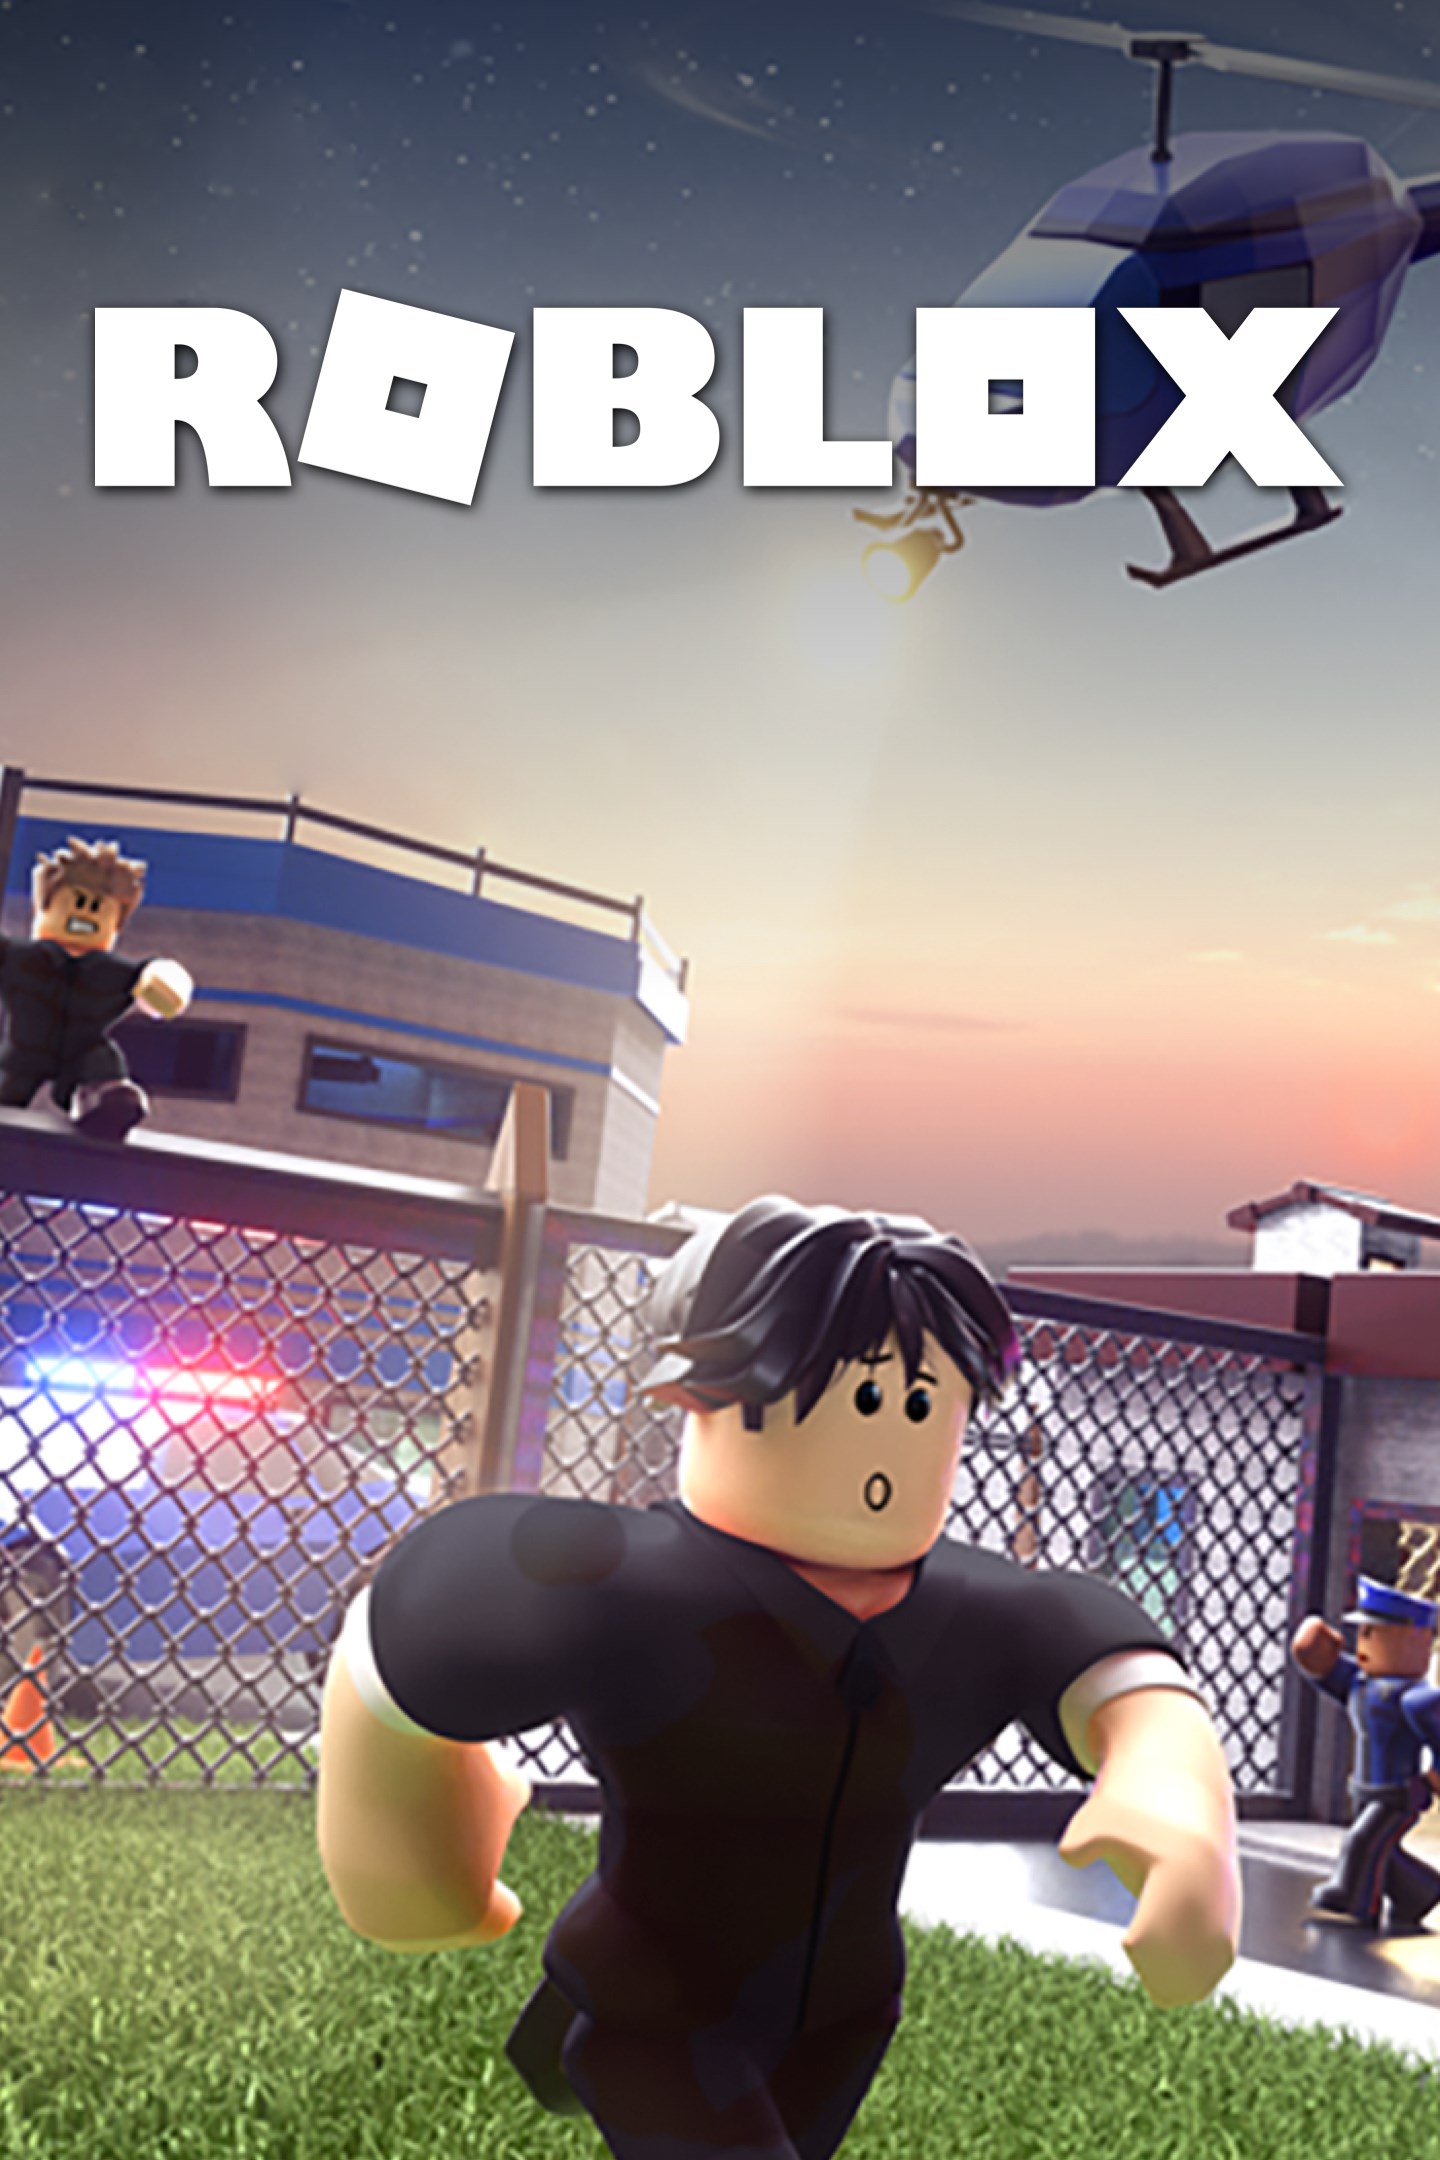 How To Swear On Roblox May 2020